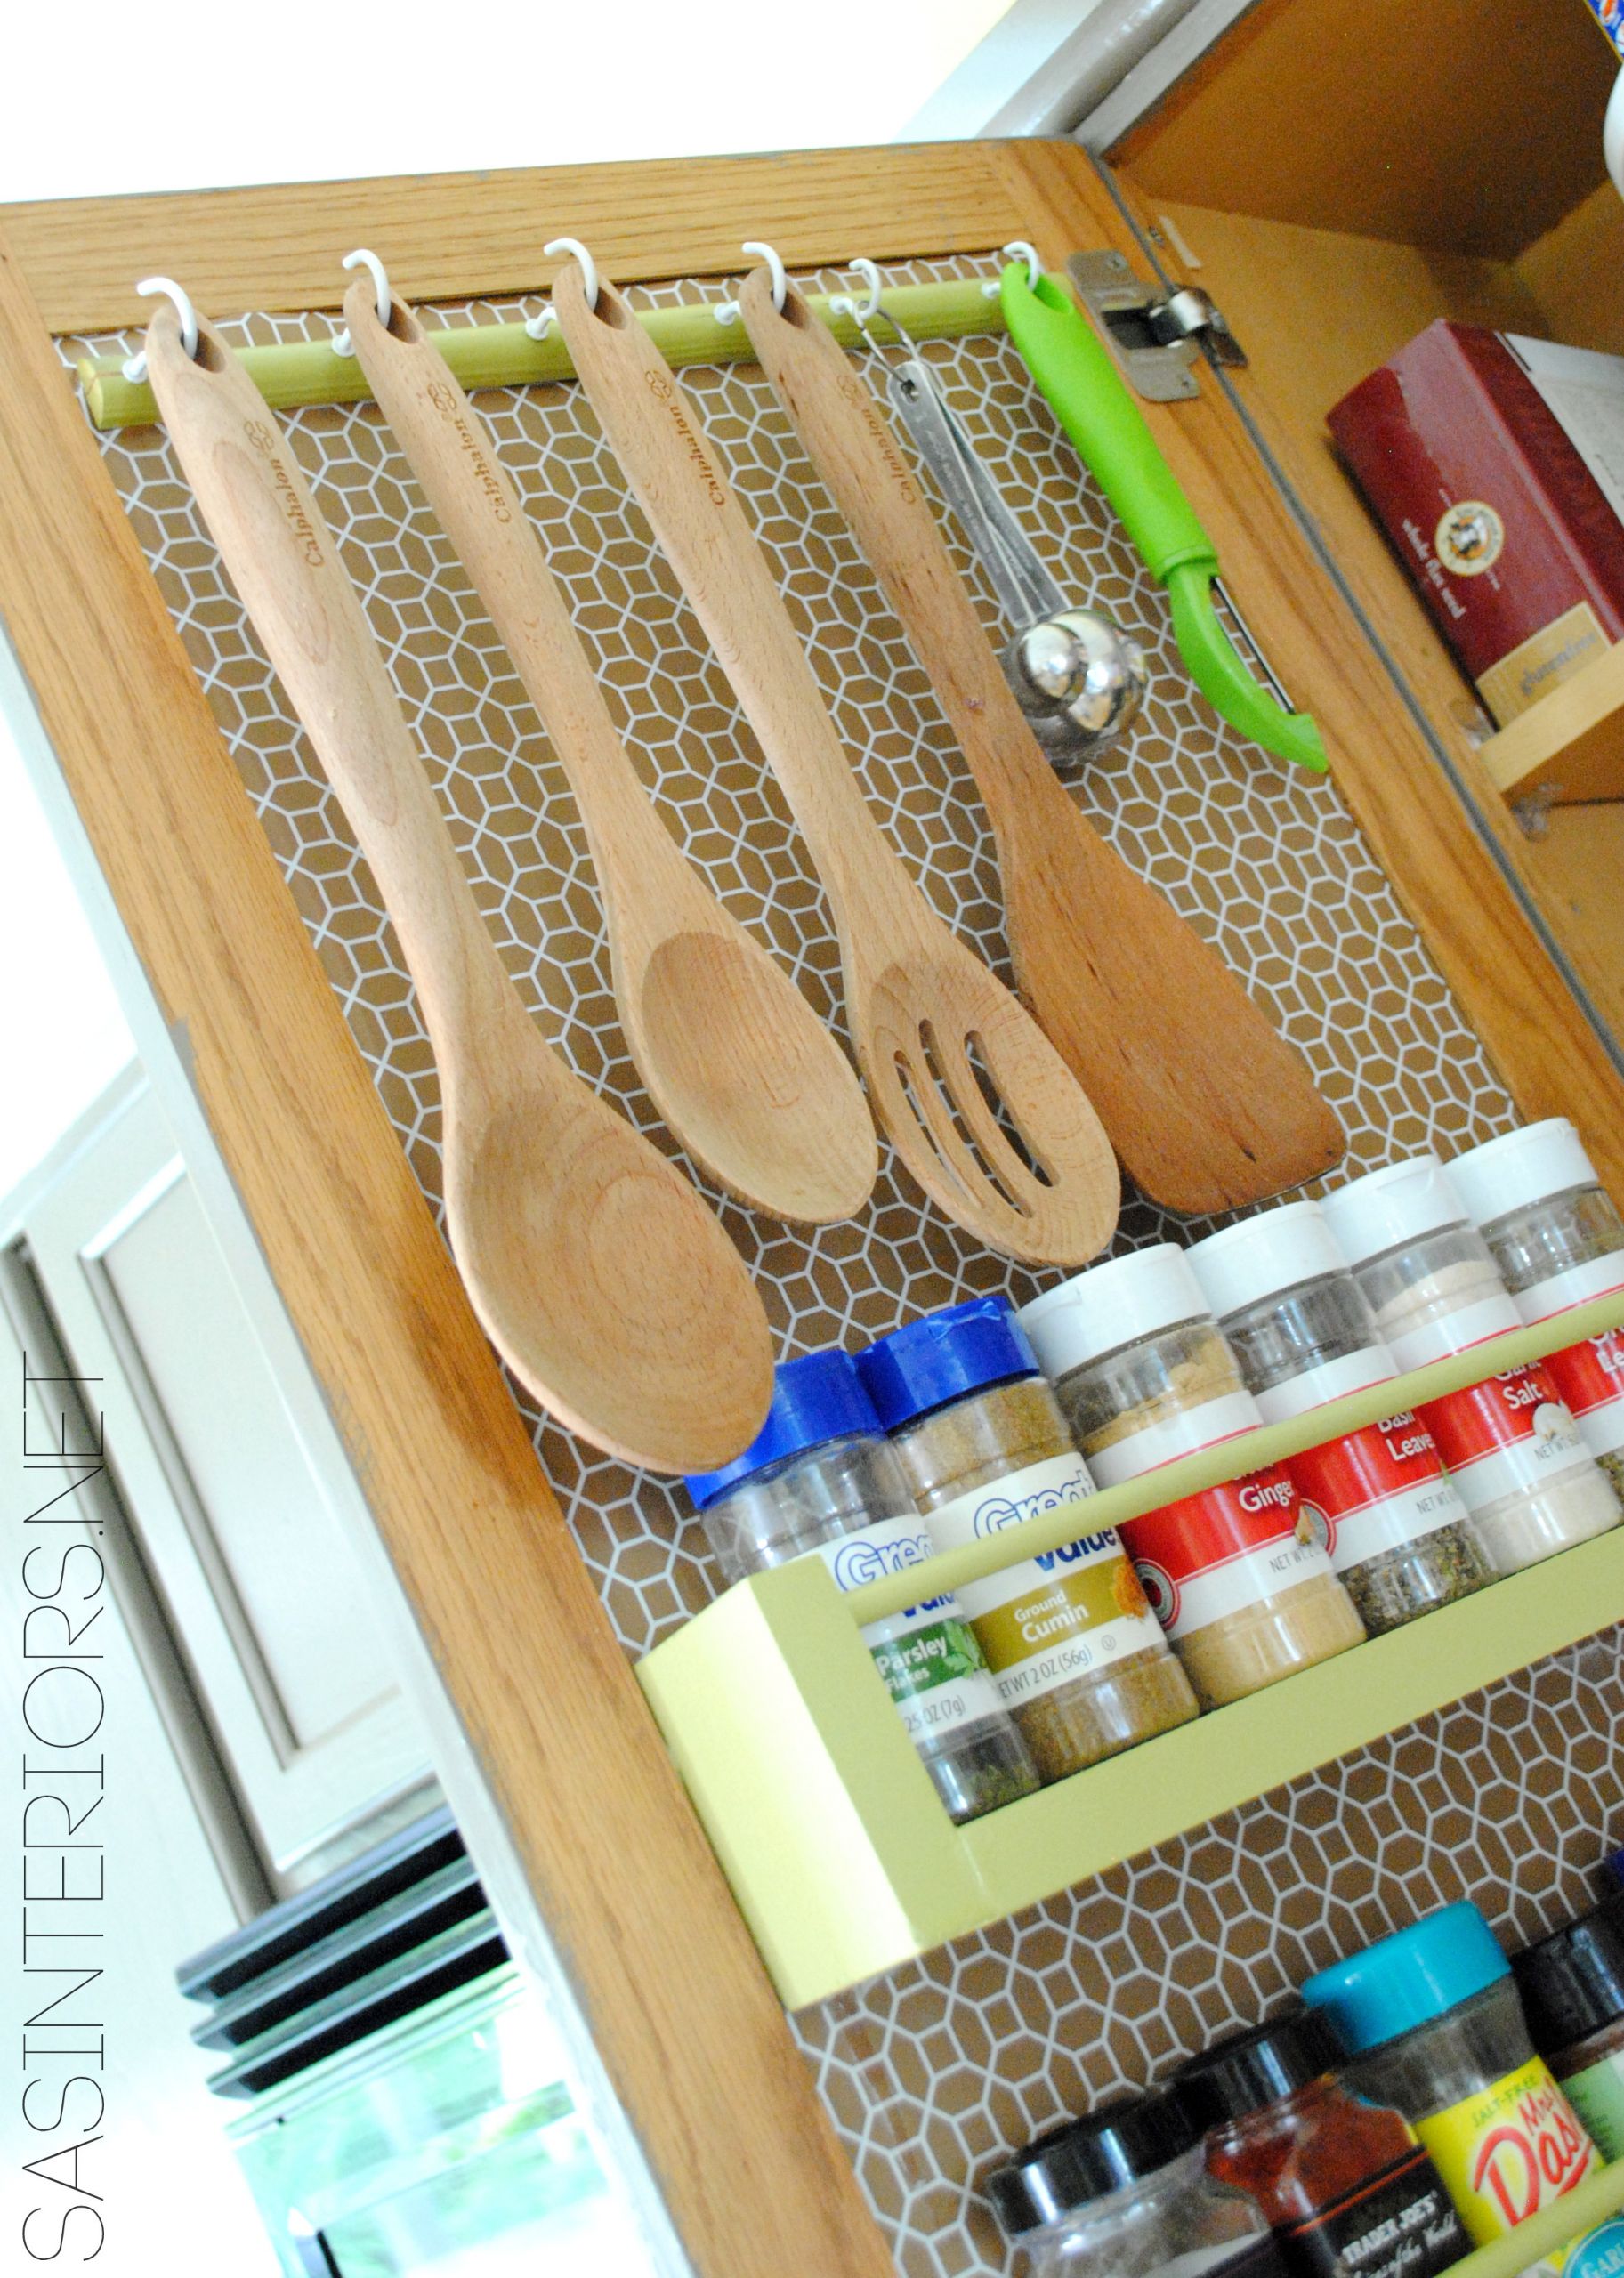 Kitchen Organizing Pinterest
 Kitchen Organization Ideas for the Inside of the Cabinet